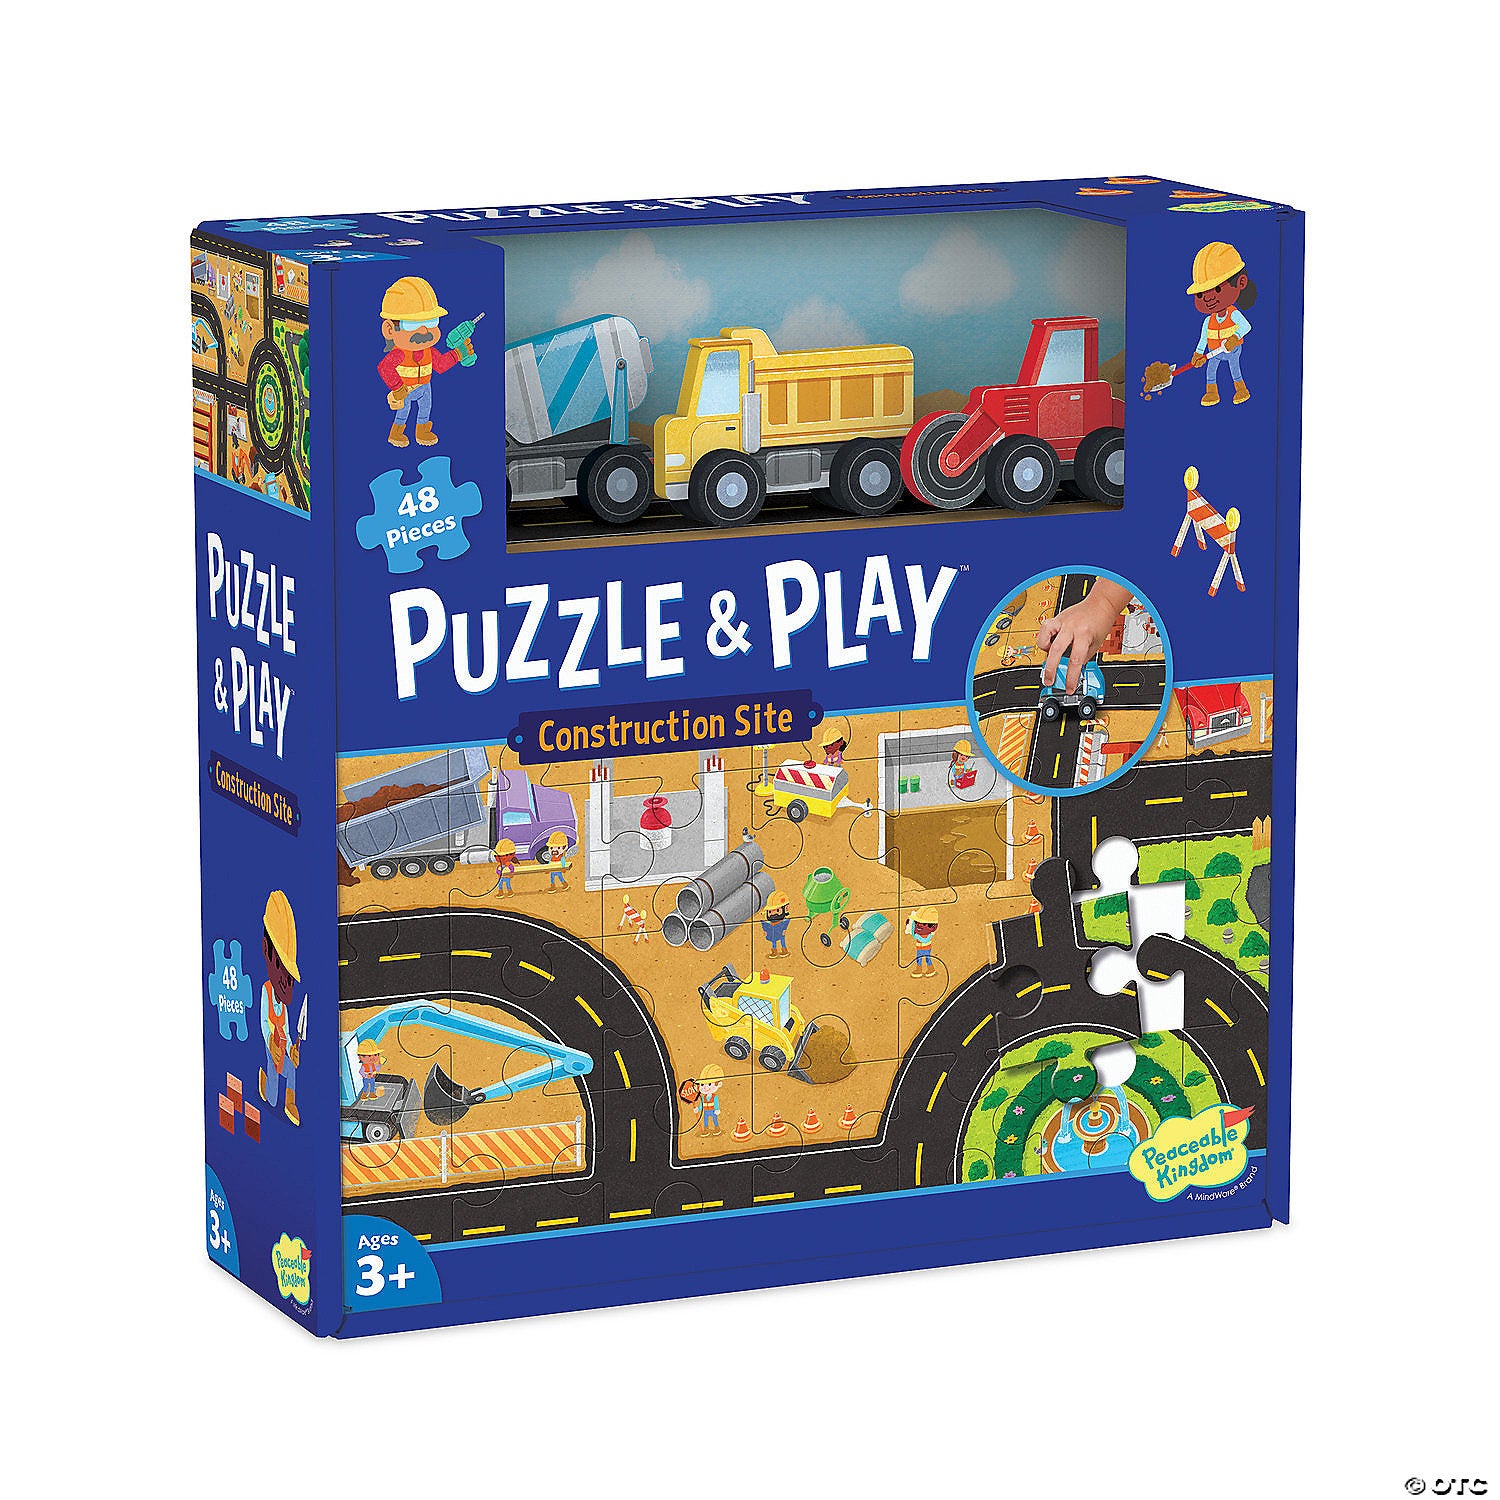 Construction Site Puzzle And Play